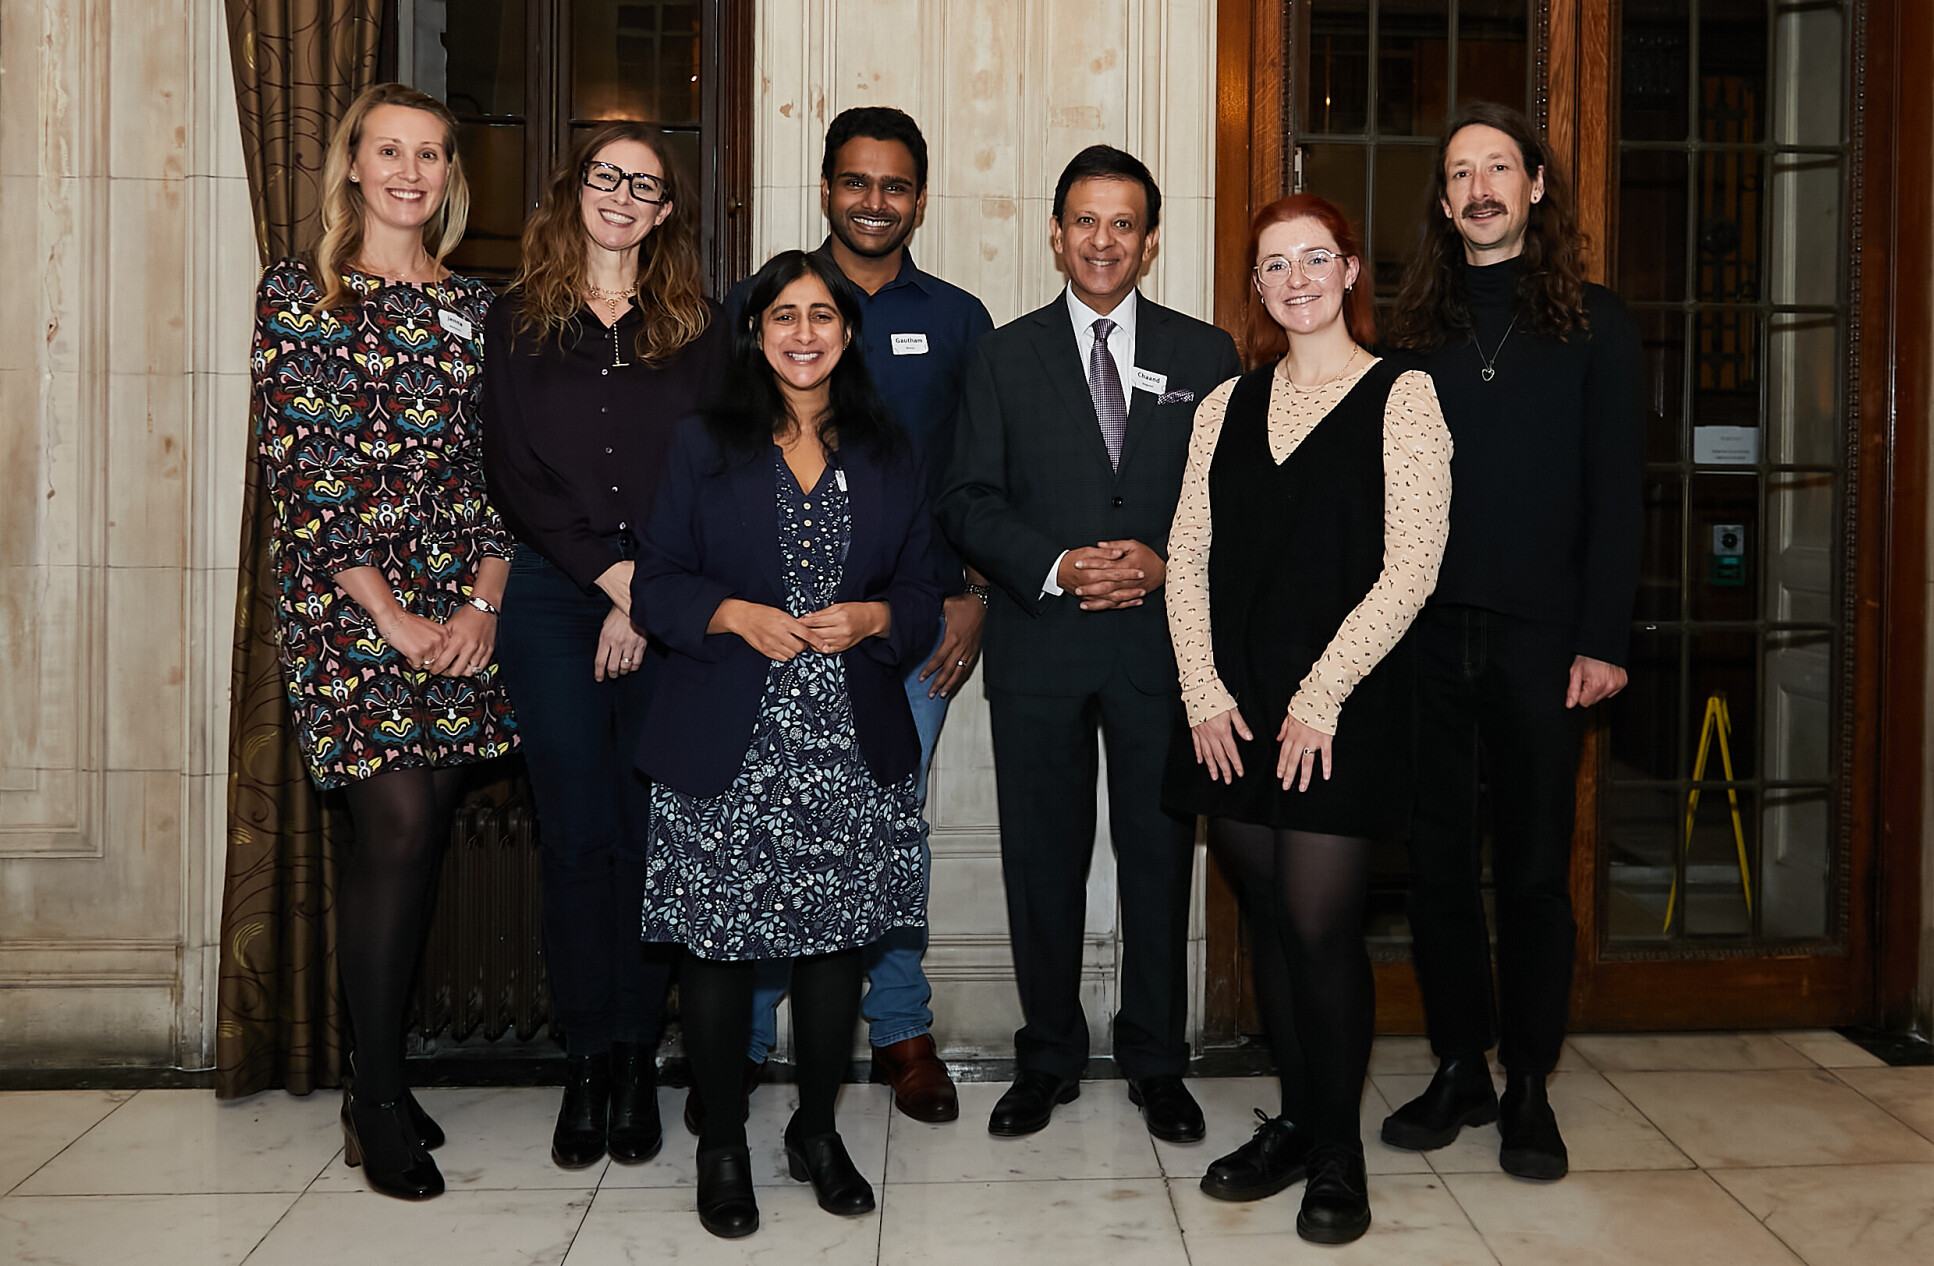 The Undergraduate Primary Care Team with the event’s guest speakers – (L-R) Jenna Mollaney, Dr Sian Powell, Dr Arti Maini, Dr Gautham Benoy, Dr Chaand Nagpaul, Dr Lisa-Jayne Edwards and Tom Rozier-Hope 